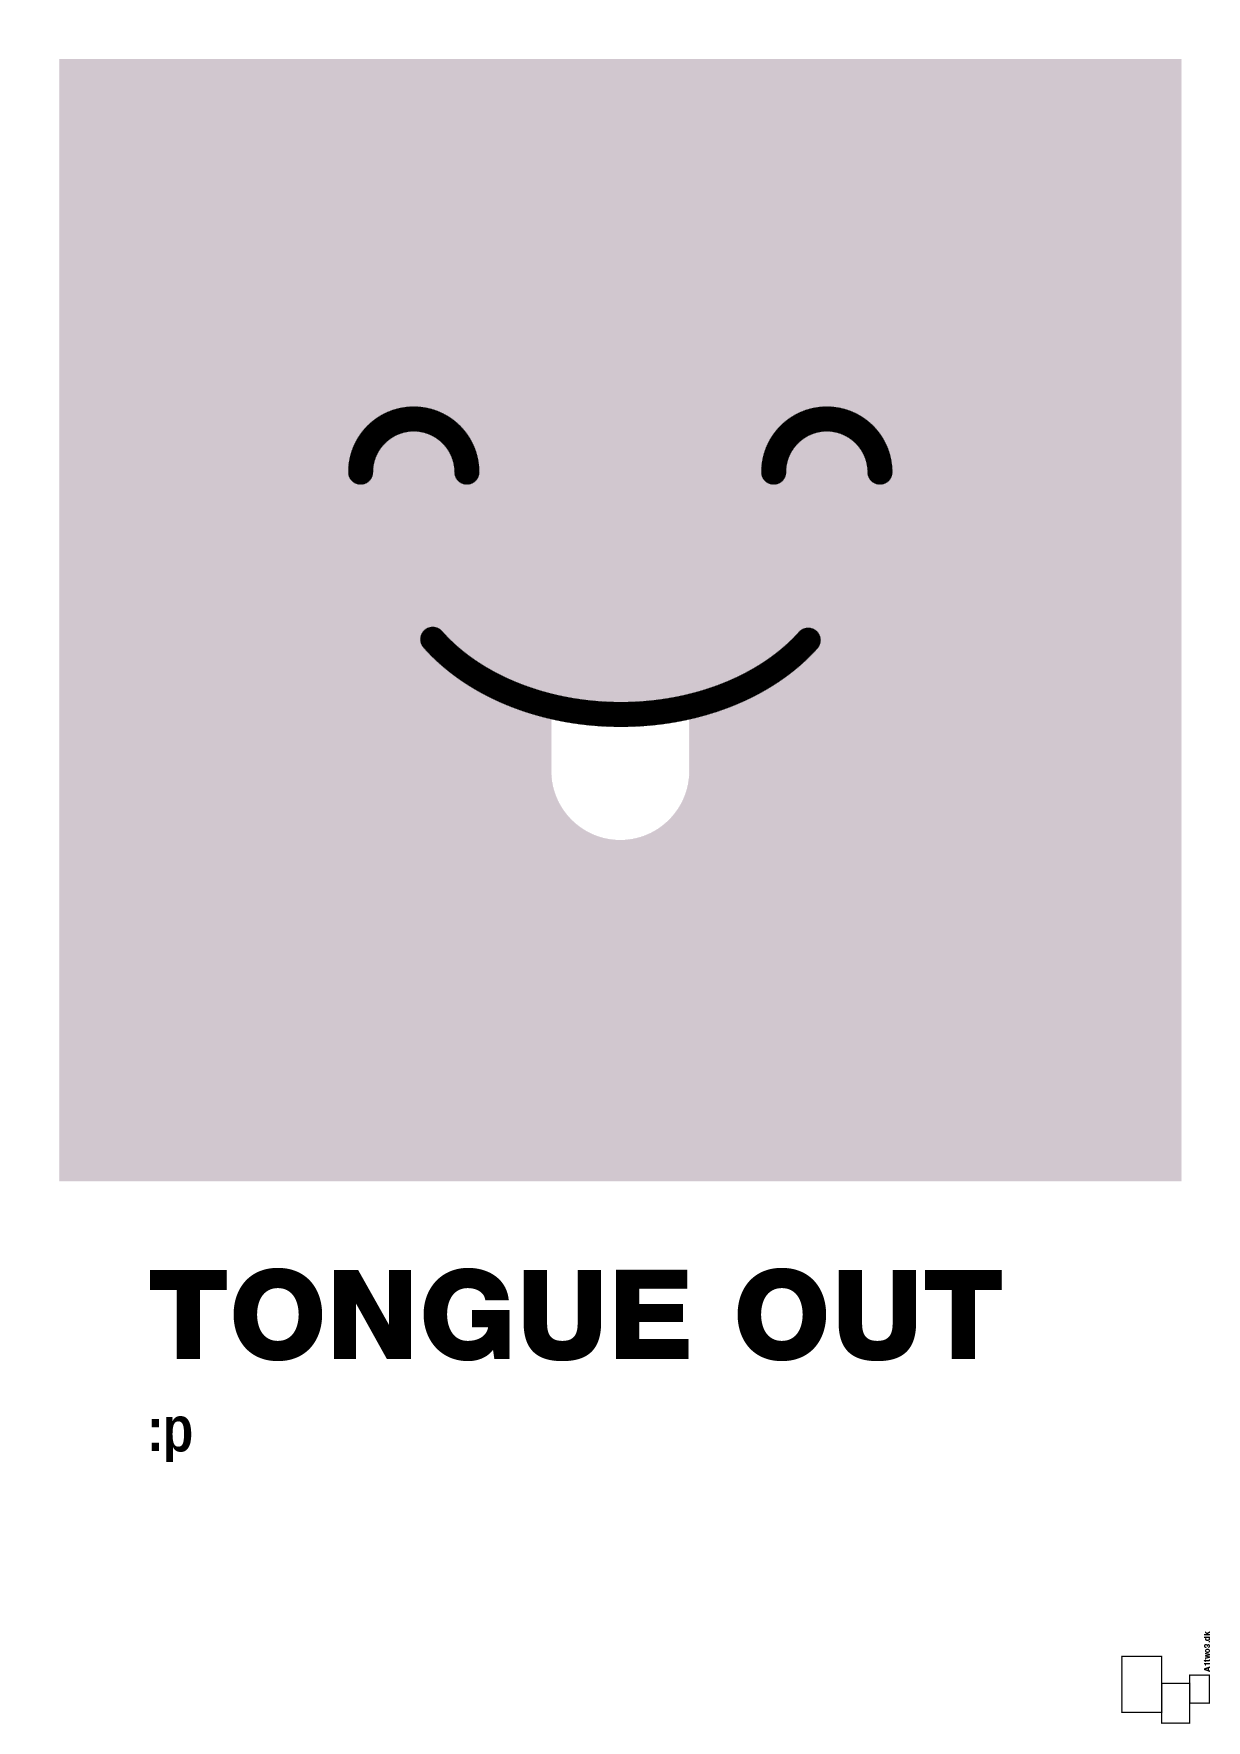 tongue out smiley - Plakat med Grafik i Dusty Lilac